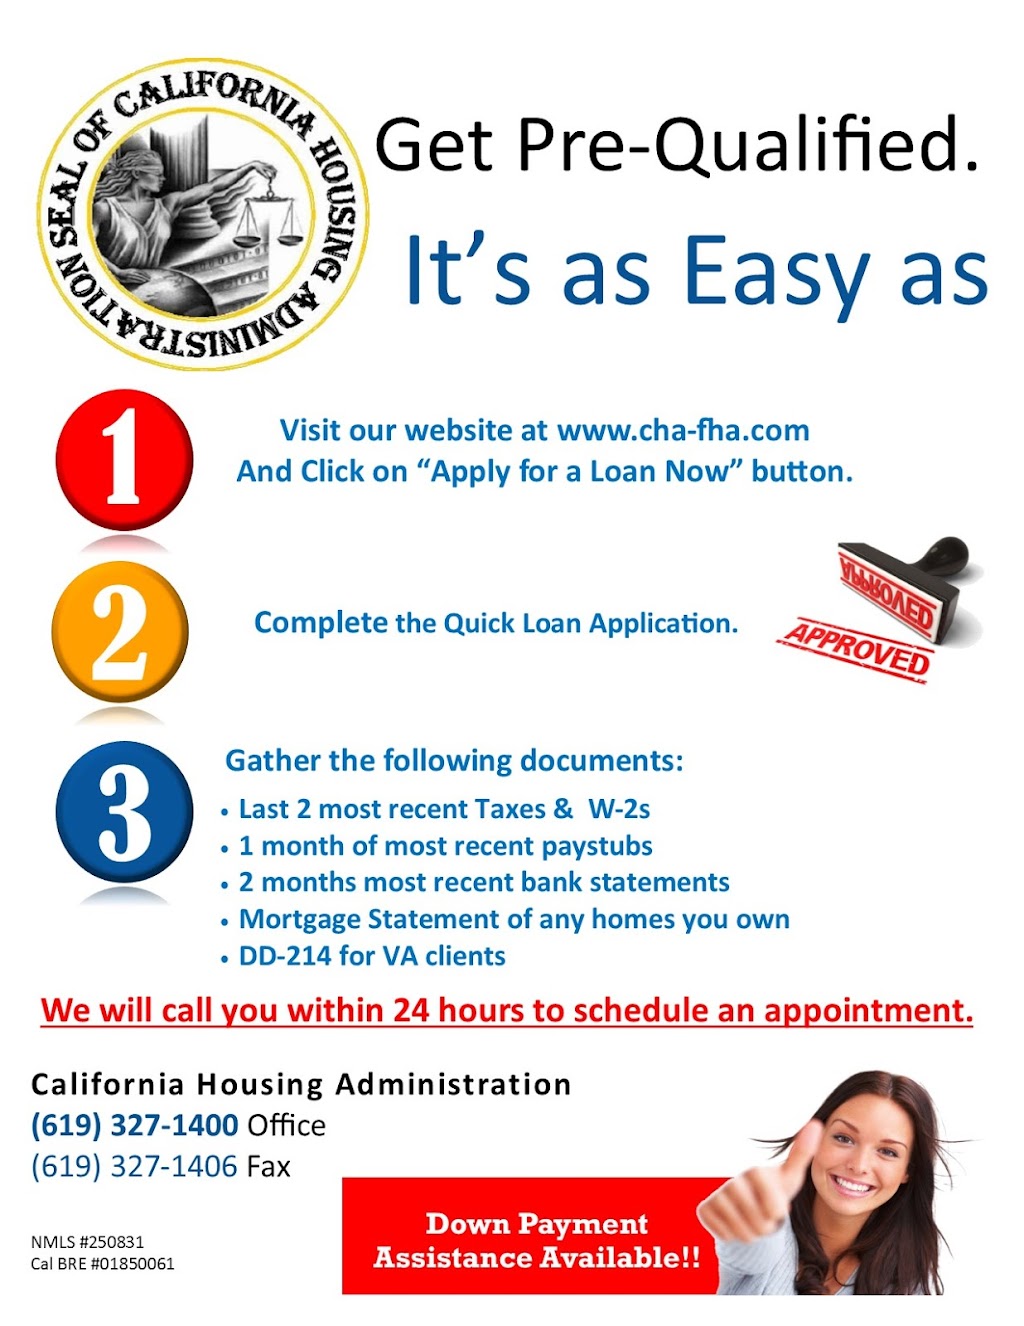 California Housing Administration | 1625 Sweetwater Rd Suite D, National City, CA 91950, USA | Phone: (619) 327-1400